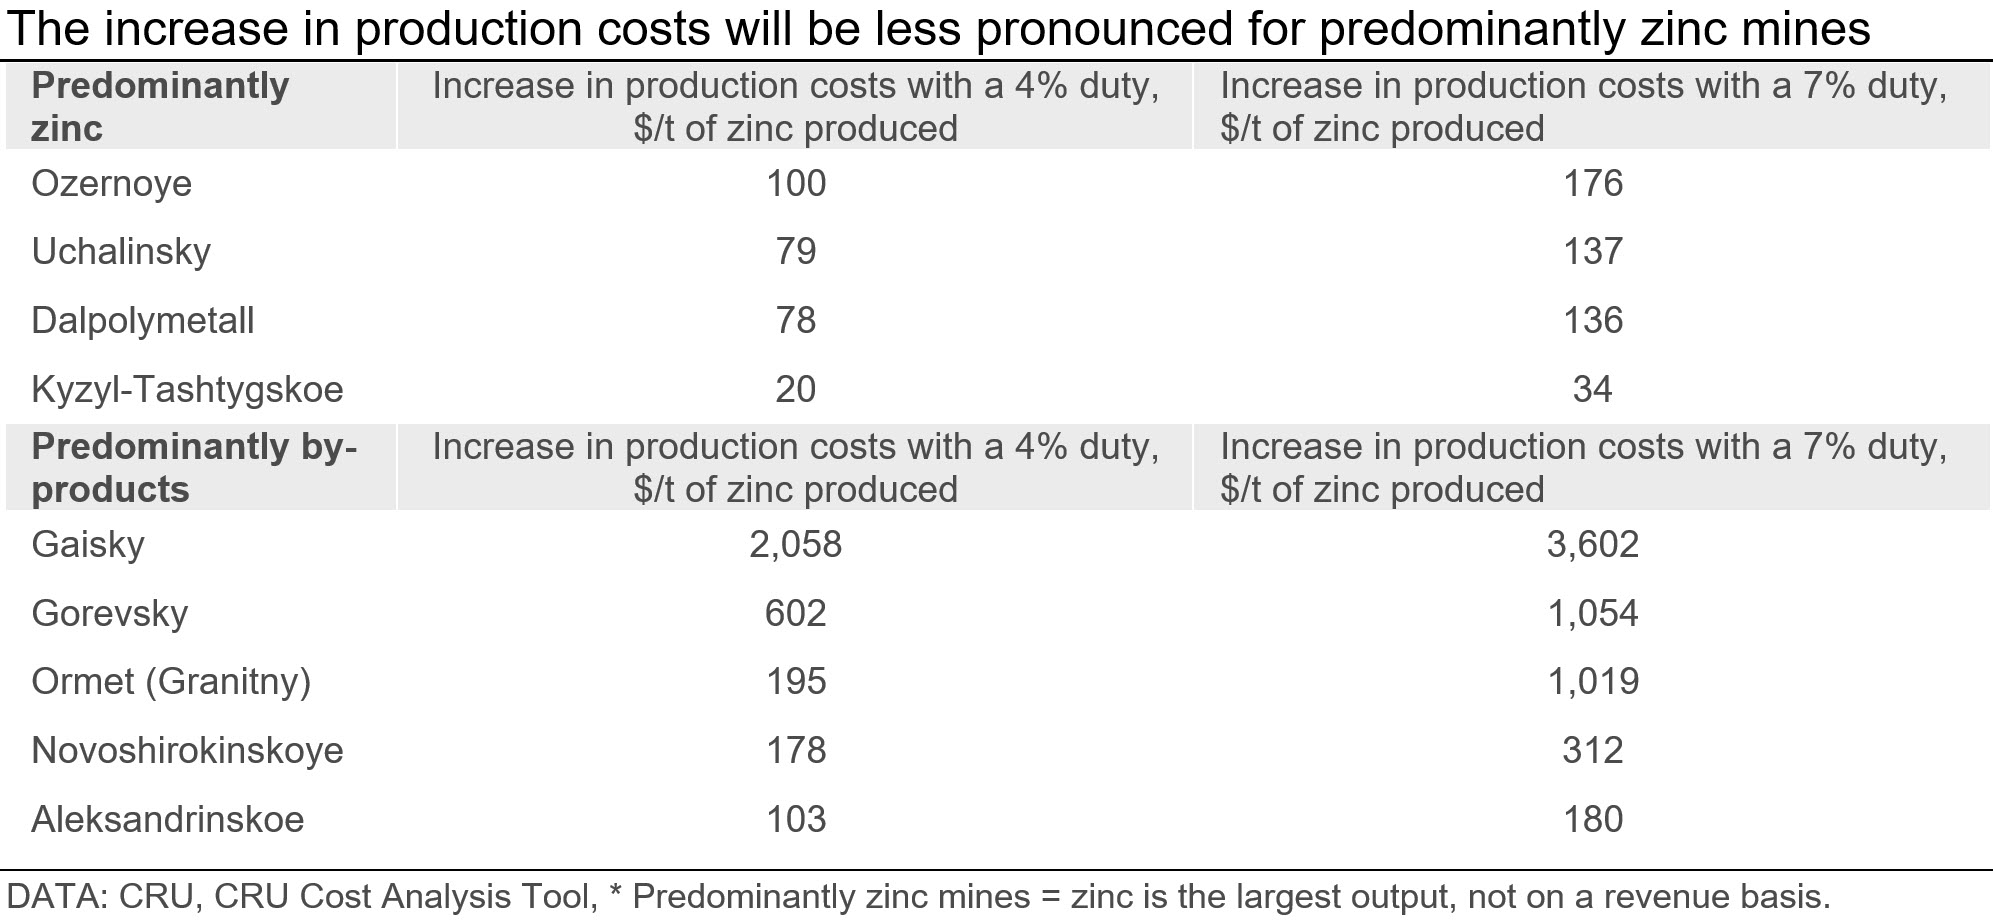 Chart showing that the increase in production costs will be less pronounced for predominantly zinc mines